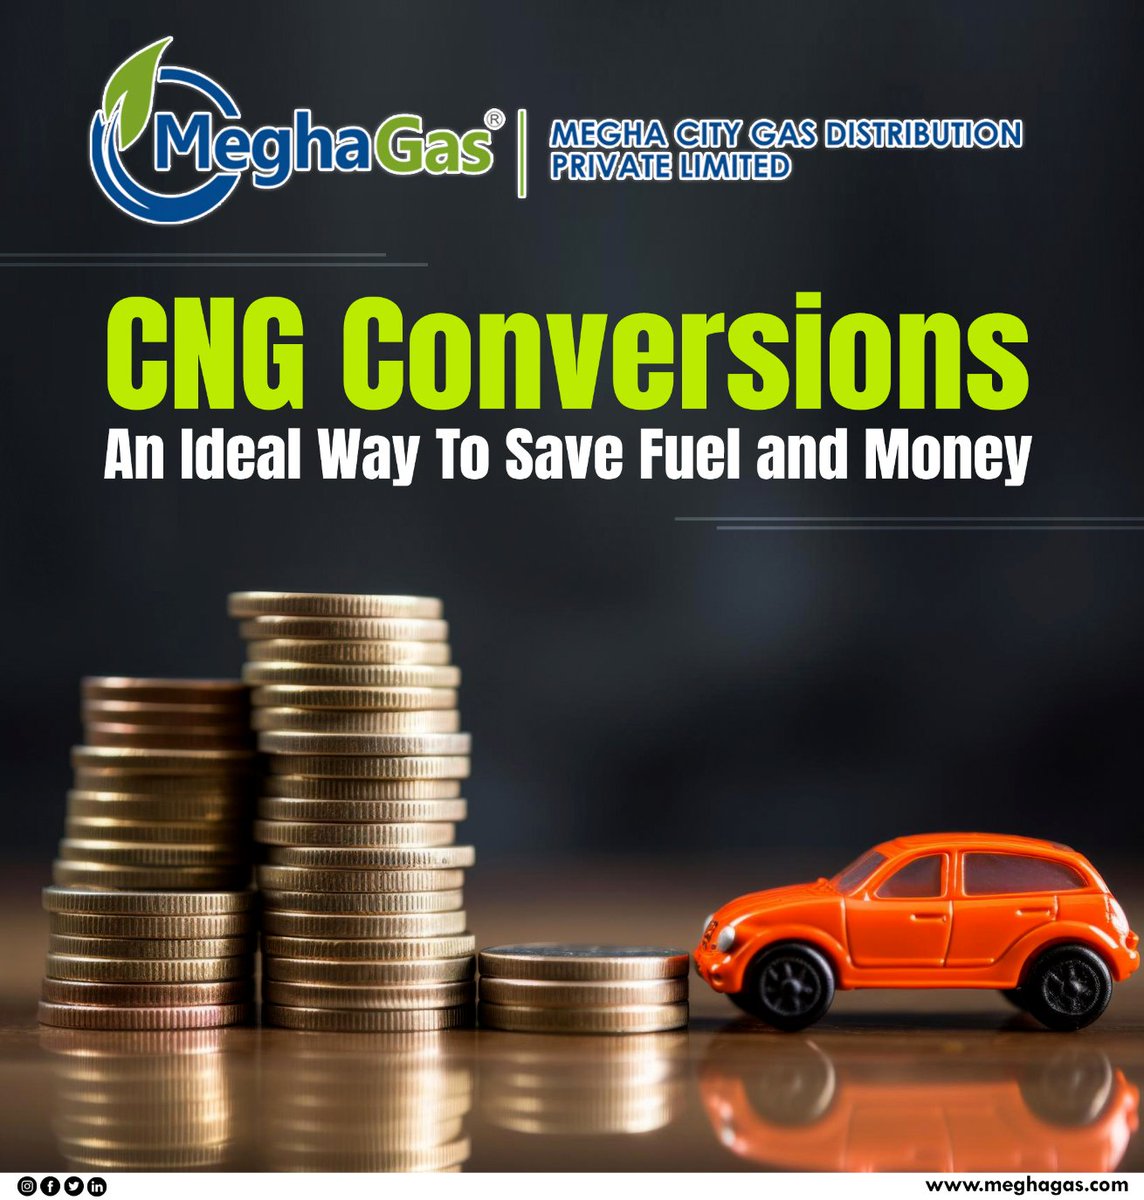 With GOI approval for #CNG retrofitment for #BS6 vehicles, you can convert #petrol cars or #diesel engines up to 3.5 tonnes to greener fuels. Make your ride eco-friendly & cost-effective. Retrofit at authorised dealers or #CNGkit suppliers only. meghagas.com/about-cng#kit-… #MeghaGas